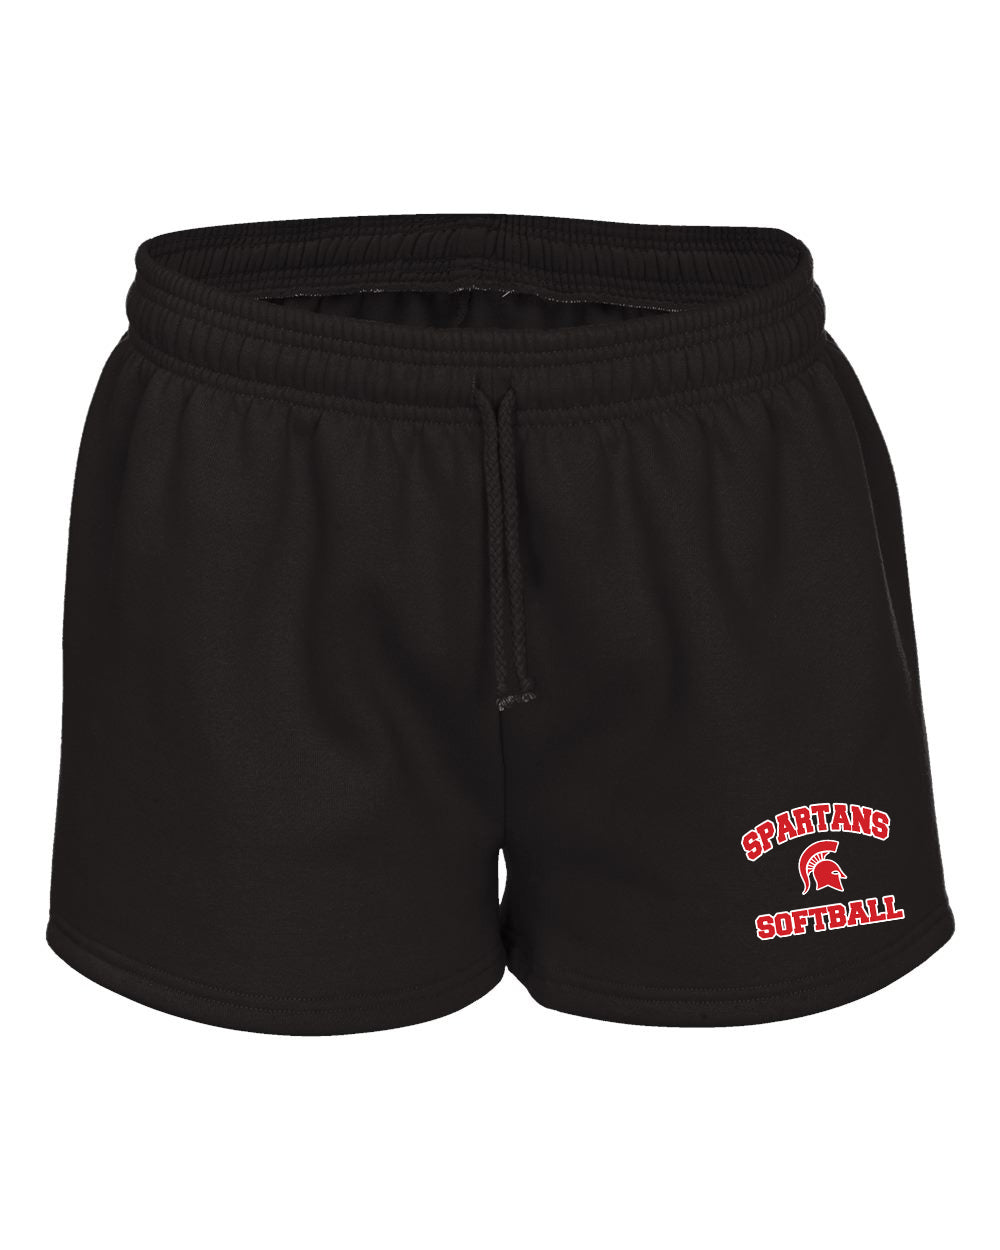 ELGS Ladies Badger Fleece shorts - 1203 (color options available)